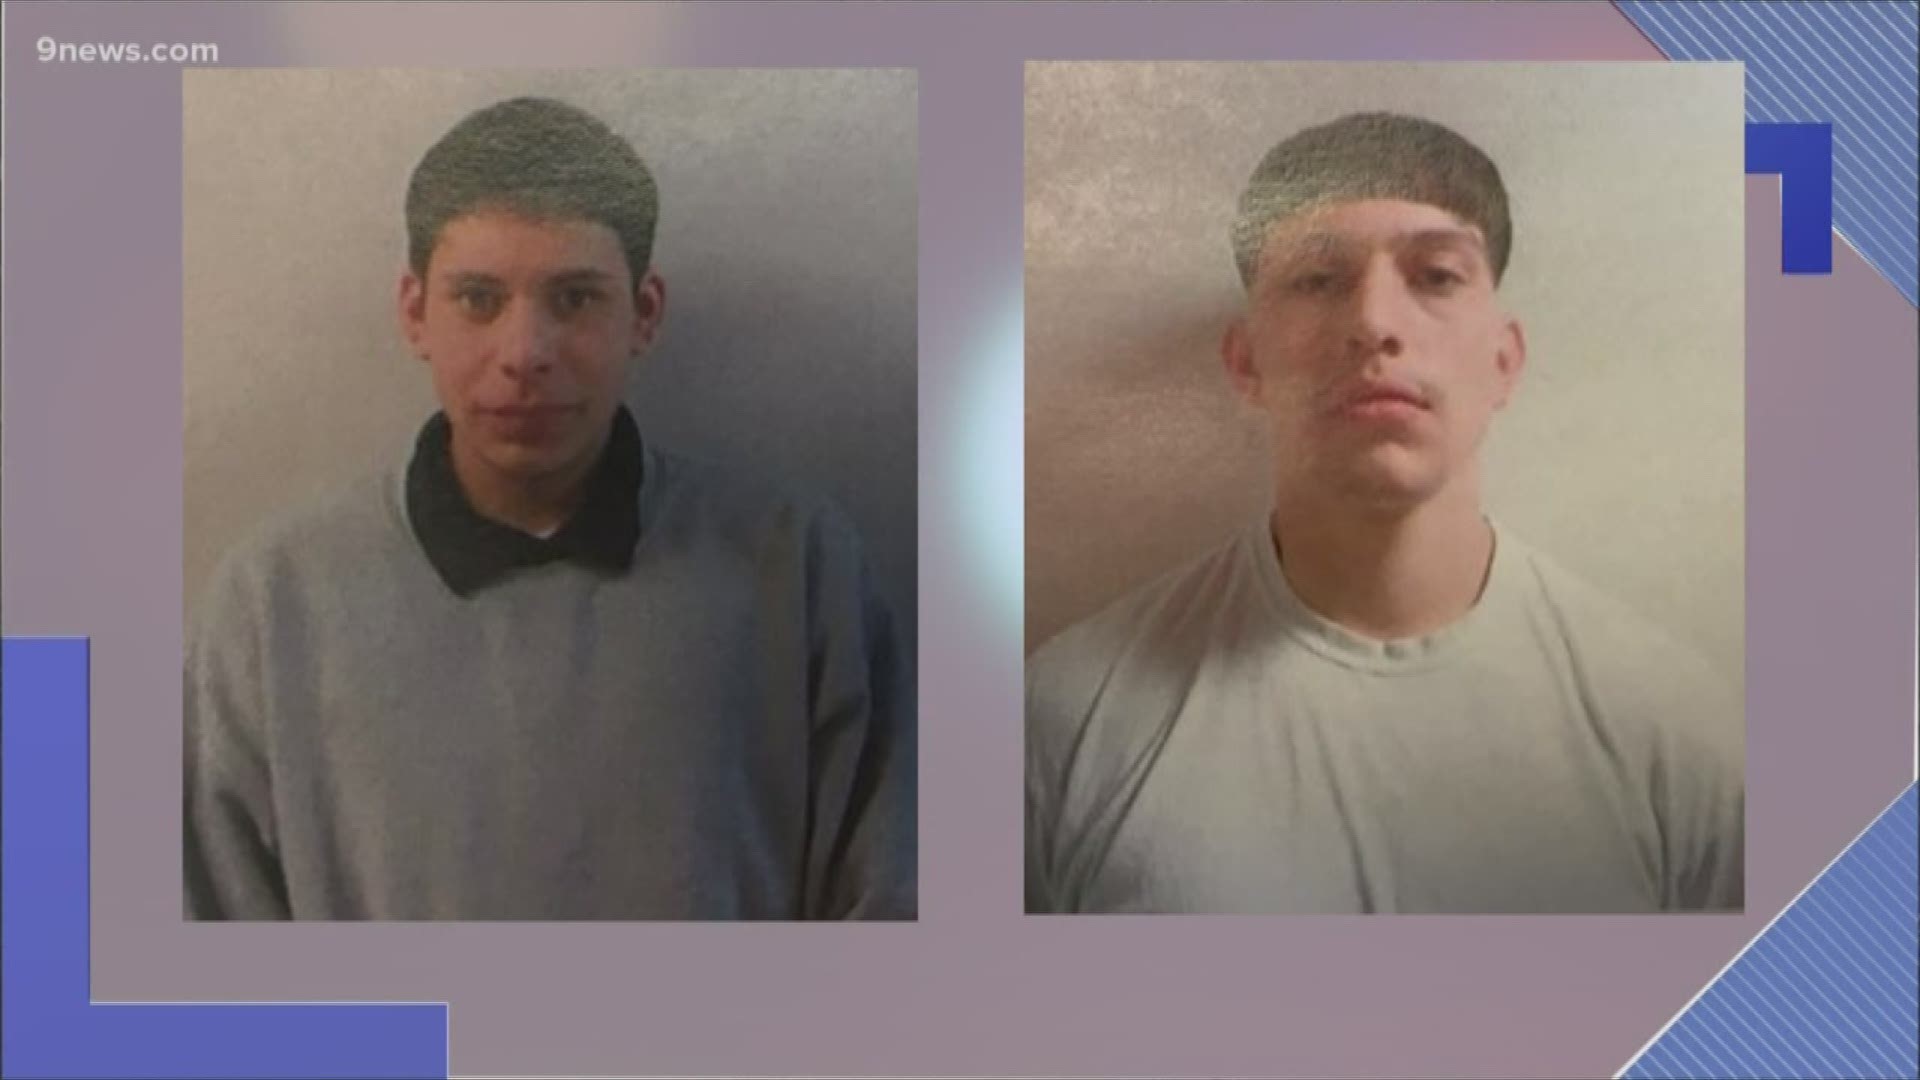 17-year-olds Emilio Domingues and Eduardo Ruelas escaped just before 8 p.m. Saturday, according to the sheriff's office.